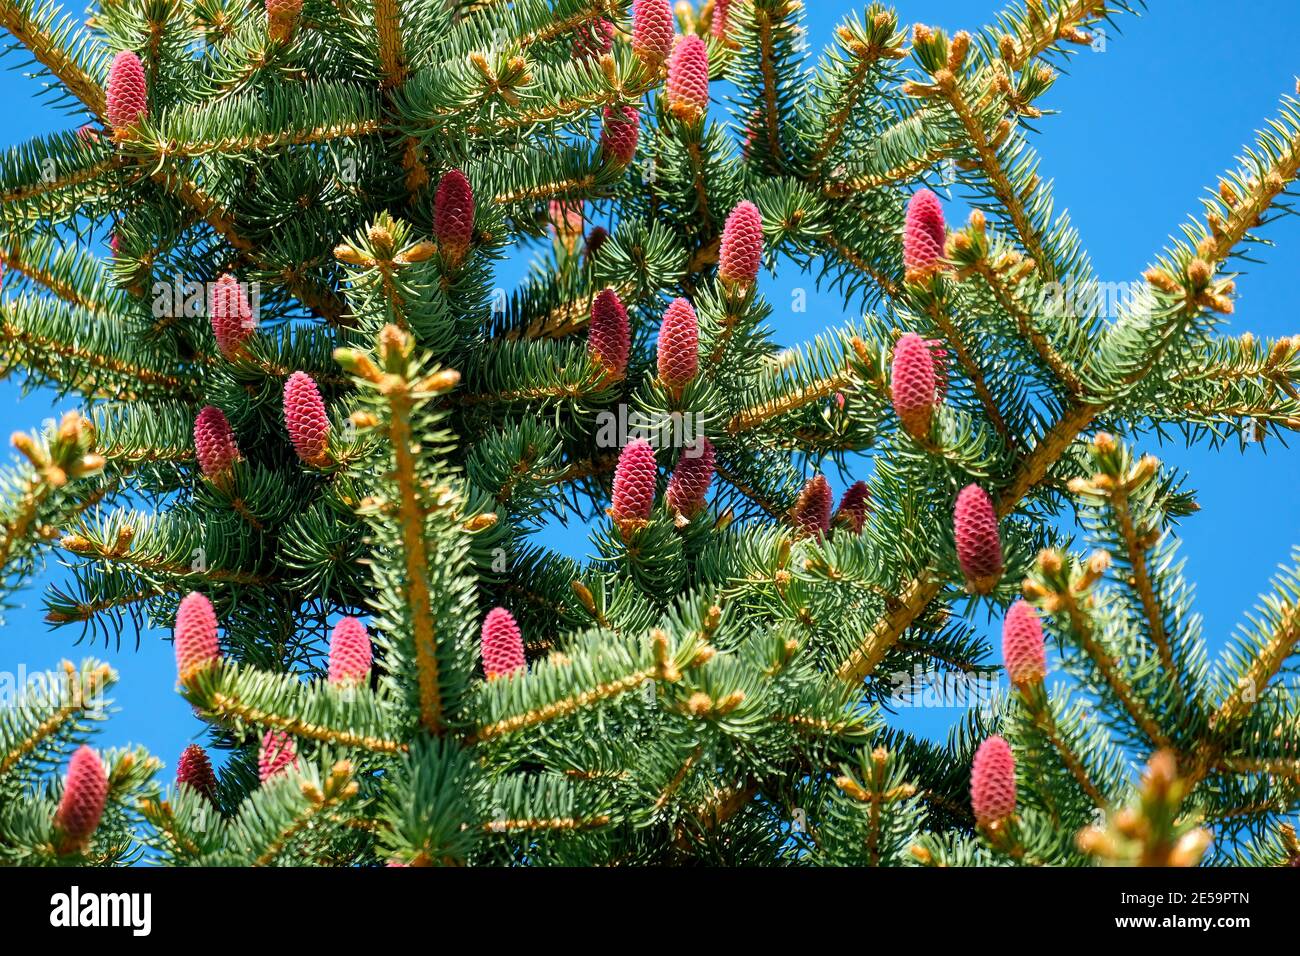 Blue spruce with red cones on a blue sky background. Stock Photo